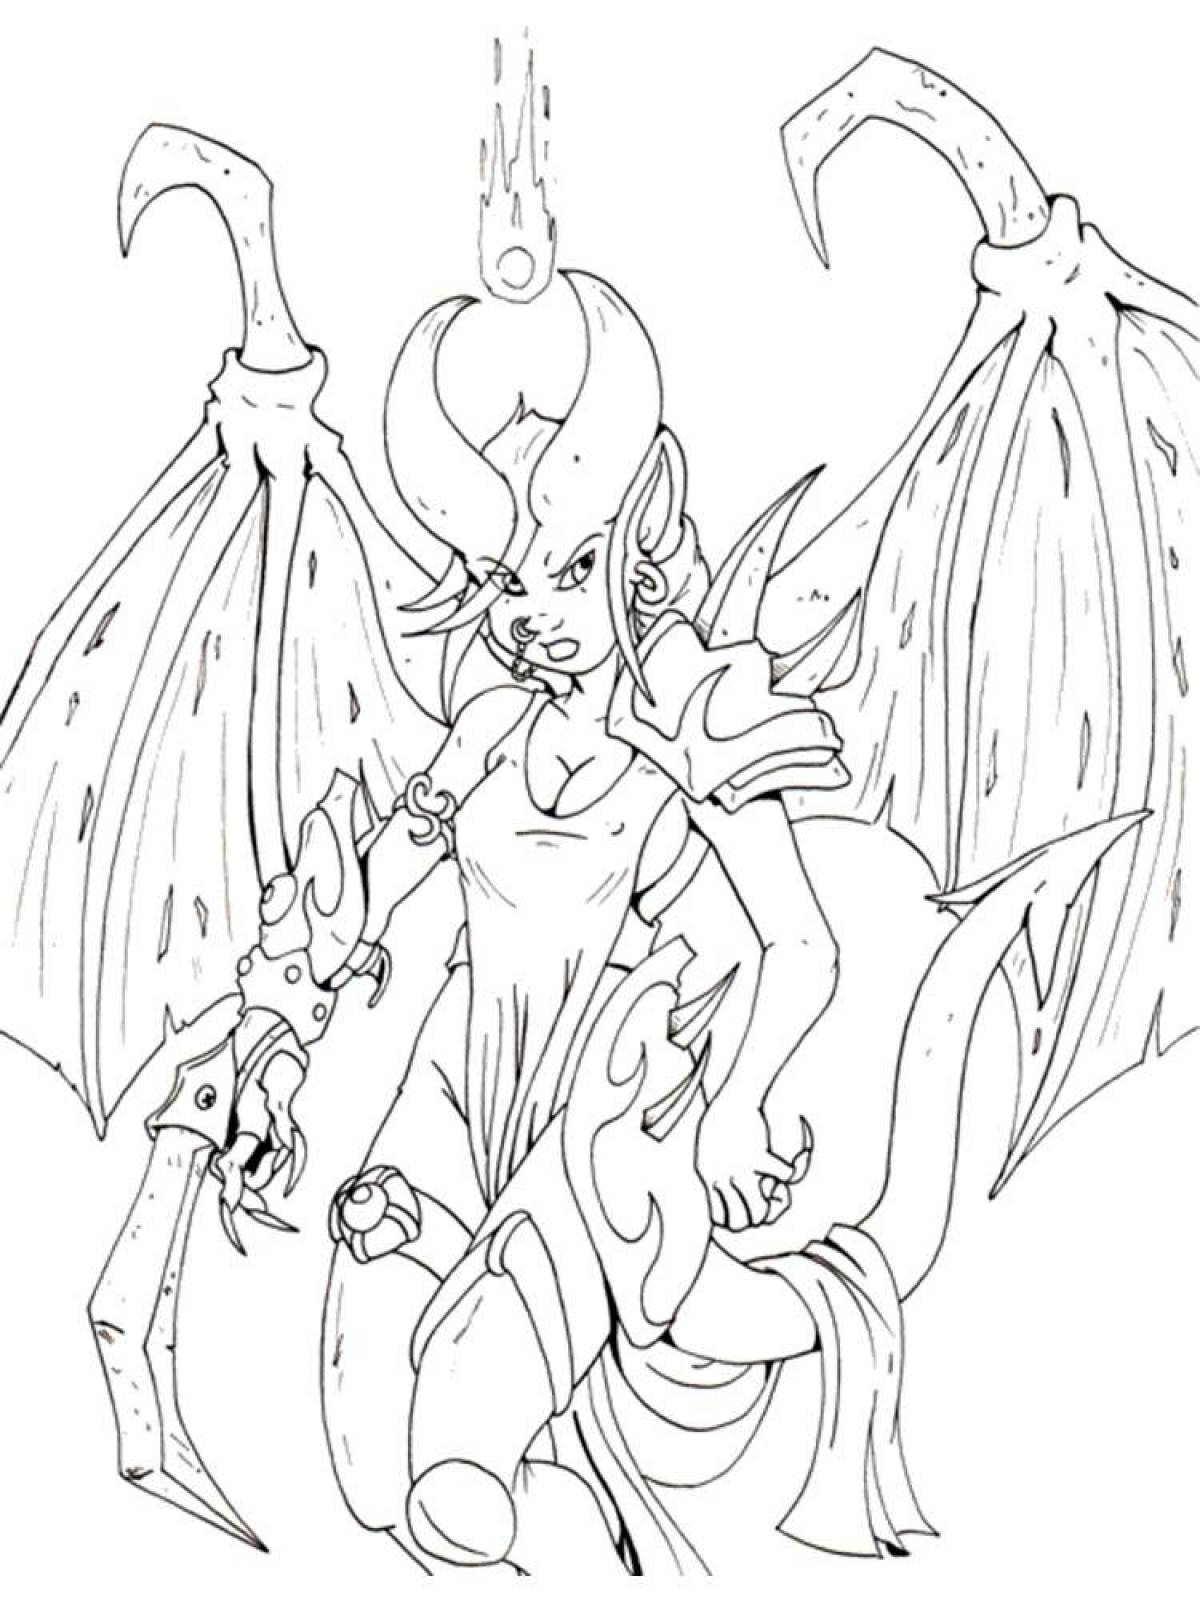 Great demon coloring page